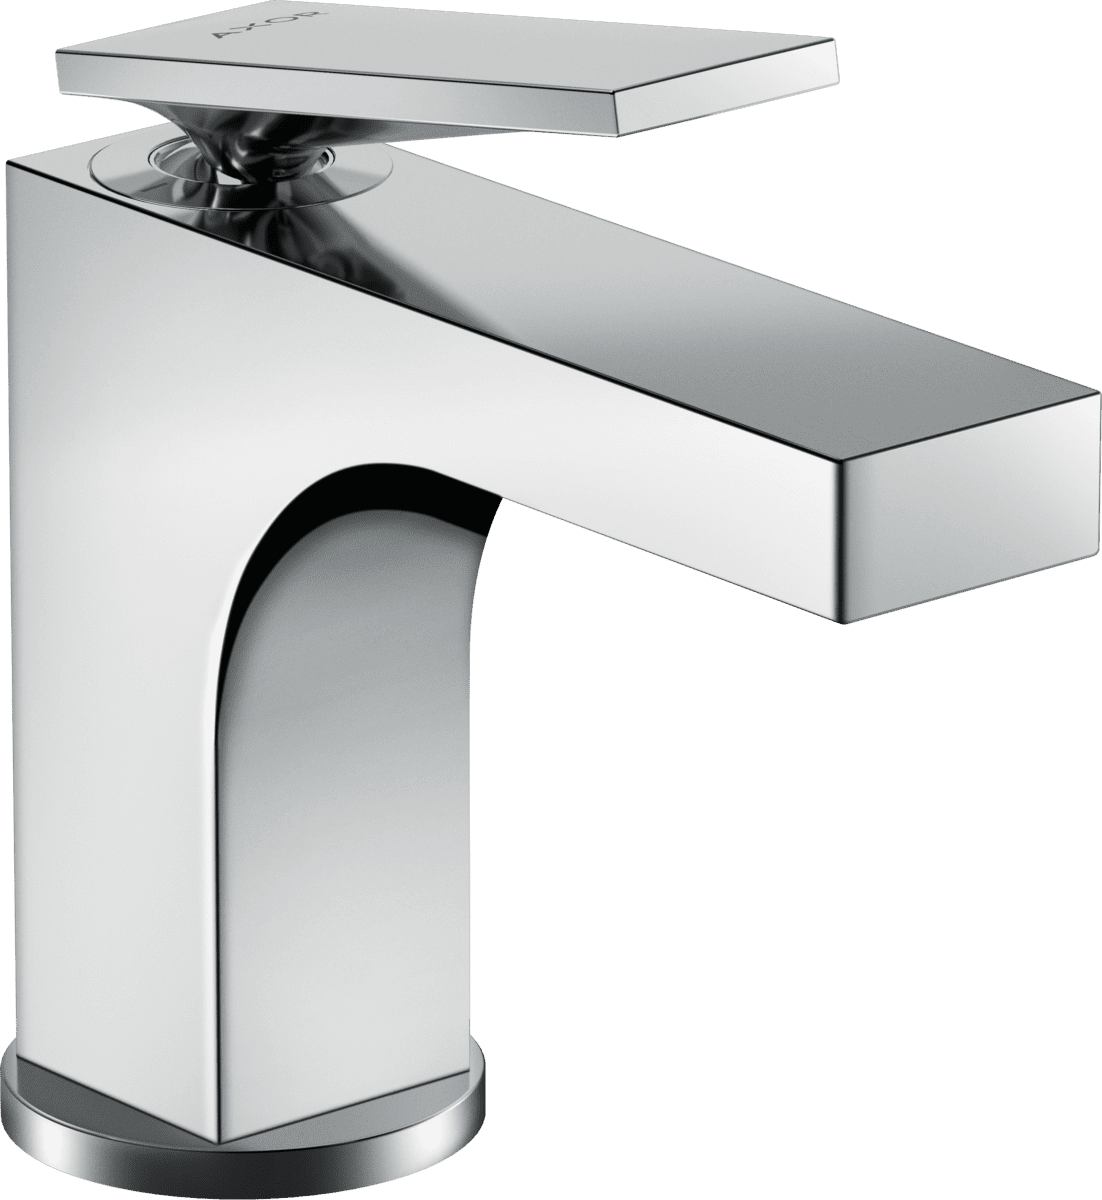 Picture of HANSGROHE AXOR Citterio Single lever basin mixer 90 with lever handle for hand wash basins with pop-up waste set #39022000 - Chrome